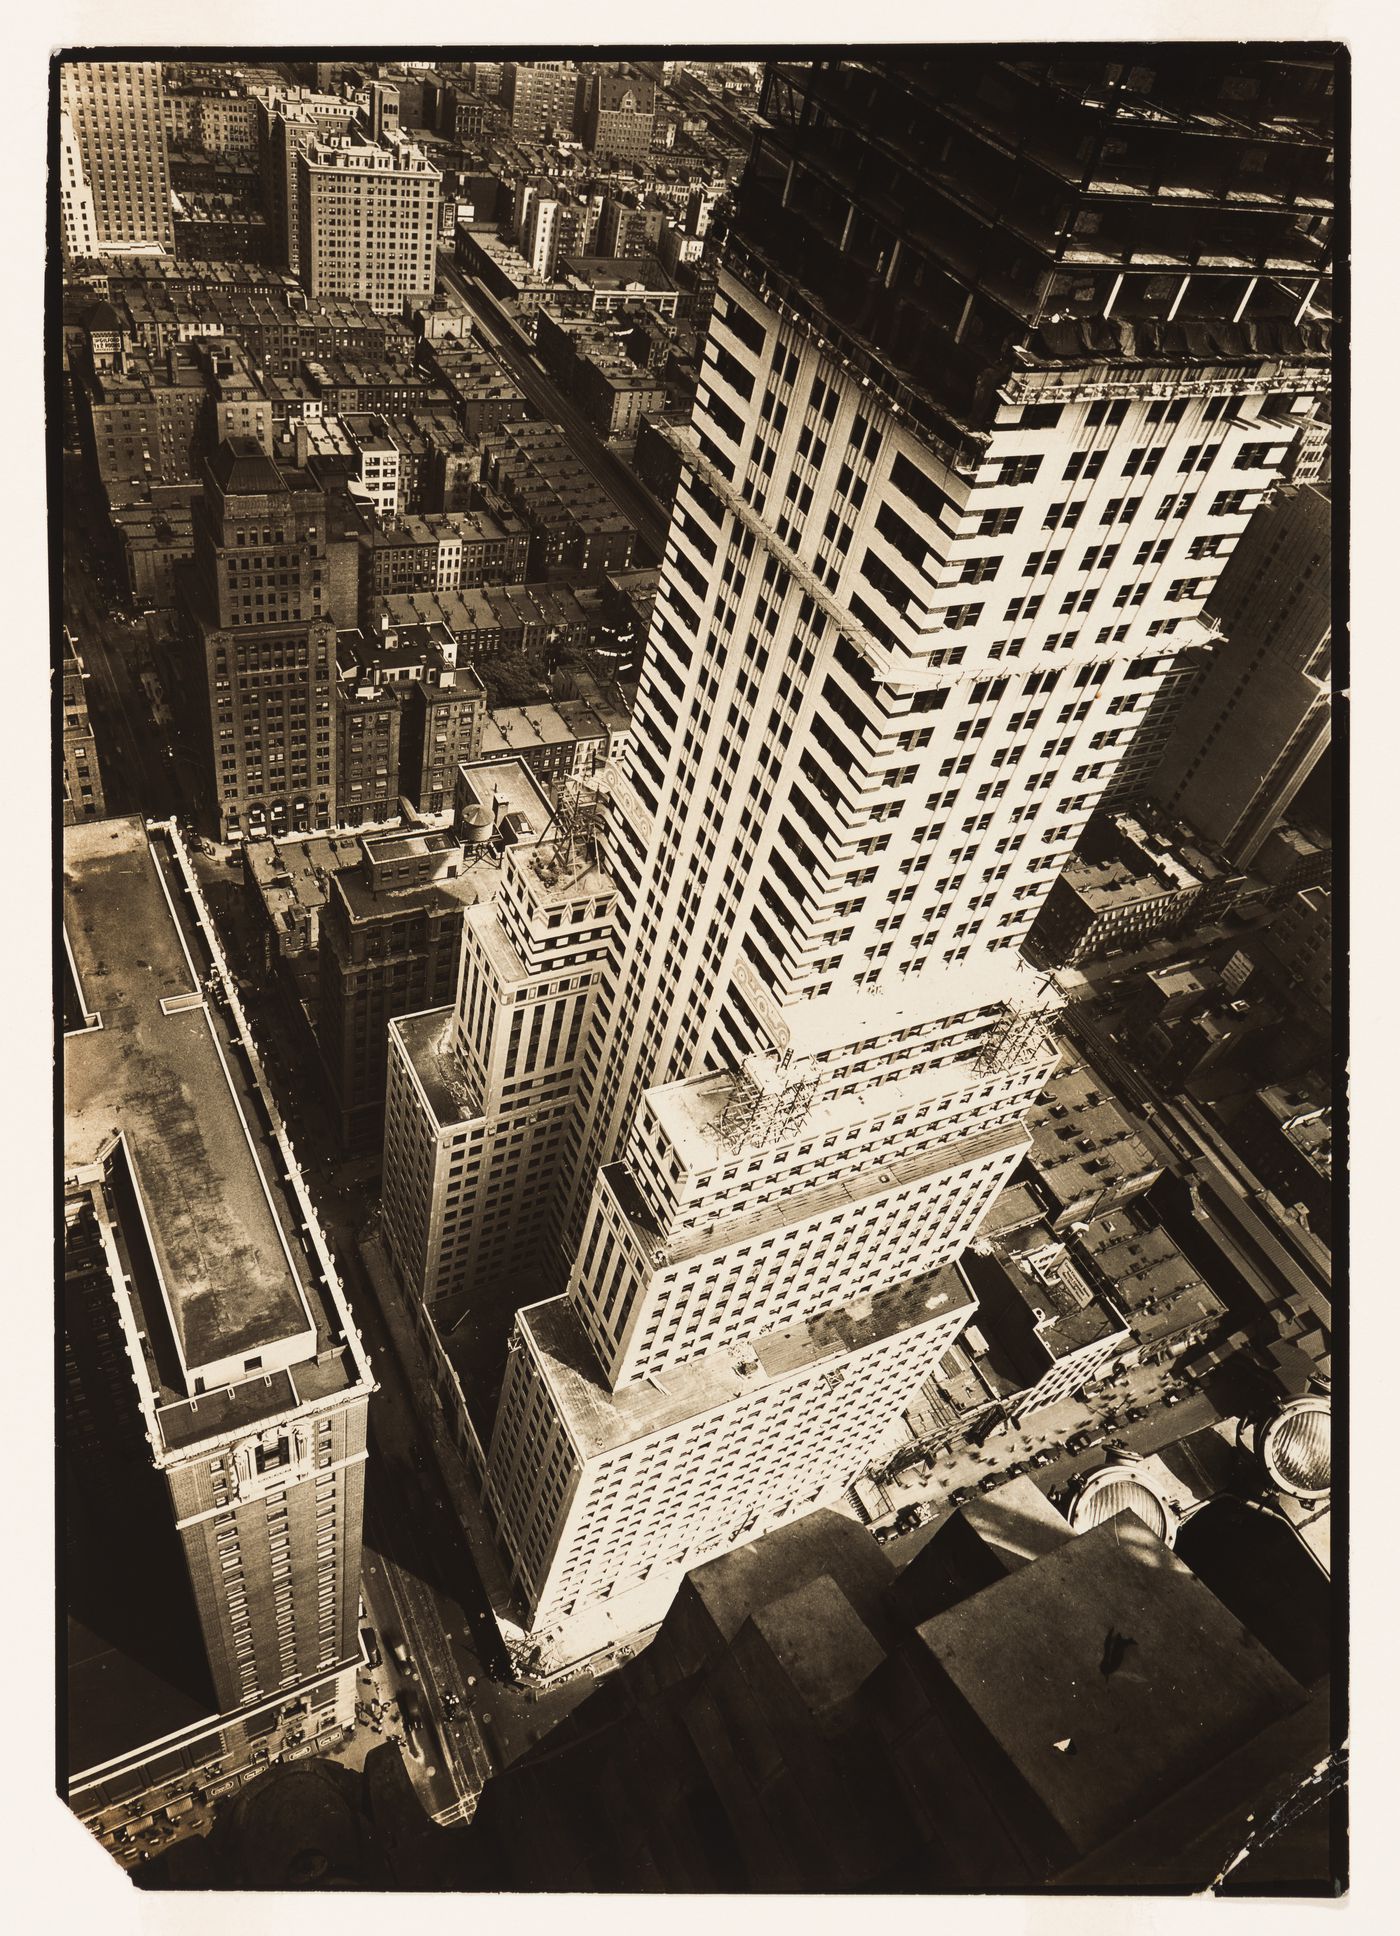 Chrysler Building under construction, looking down from above, Manhattan, New York City, New York